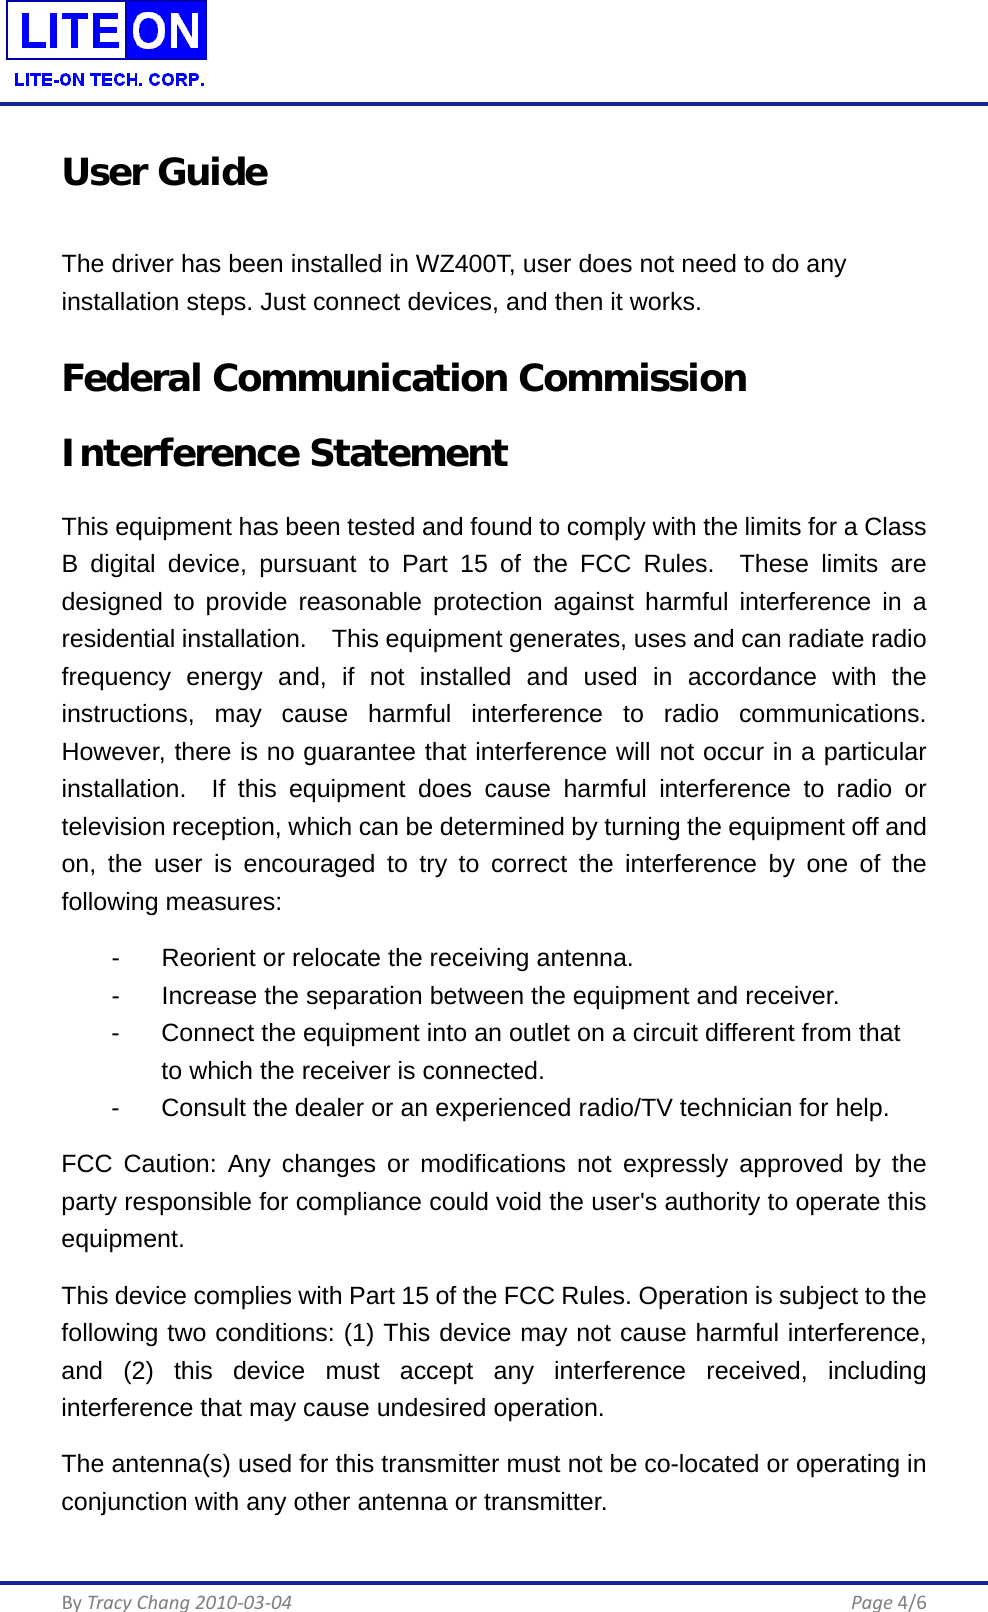  By Tracy Chang 2010-03-04      Page 4/6 User Guide The driver has been installed in WZ400T, user does not need to do any installation steps. Just connect devices, and then it works. Federal Communication Commission Interference Statement This equipment has been tested and found to comply with the limits for a Class B digital device, pursuant to Part 15 of the FCC Rules.  These limits are designed to provide reasonable protection against harmful interference in a residential installation.    This equipment generates, uses and can radiate radio frequency energy and, if not installed and used in accordance with the instructions, may cause harmful interference to radio communications.  However, there is no guarantee that interference will not occur in a particular installation.  If this equipment does cause harmful interference to radio or television reception, which can be determined by turning the equipment off and on, the user is encouraged to try to correct the interference by one of the following measures:   -  Reorient or relocate the receiving antenna.   -  Increase the separation between the equipment and receiver.   -  Connect the equipment into an outlet on a circuit different from that   to which the receiver is connected.   -  Consult the dealer or an experienced radio/TV technician for help. FCC Caution: Any changes or modifications not expressly approved by the party responsible for compliance could void the user&apos;s authority to operate this equipment. This device complies with Part 15 of the FCC Rules. Operation is subject to the following two conditions: (1) This device may not cause harmful interference, and (2) this device must accept any interference received, including interference that may cause undesired operation. The antenna(s) used for this transmitter must not be co-located or operating in conjunction with any other antenna or transmitter. 